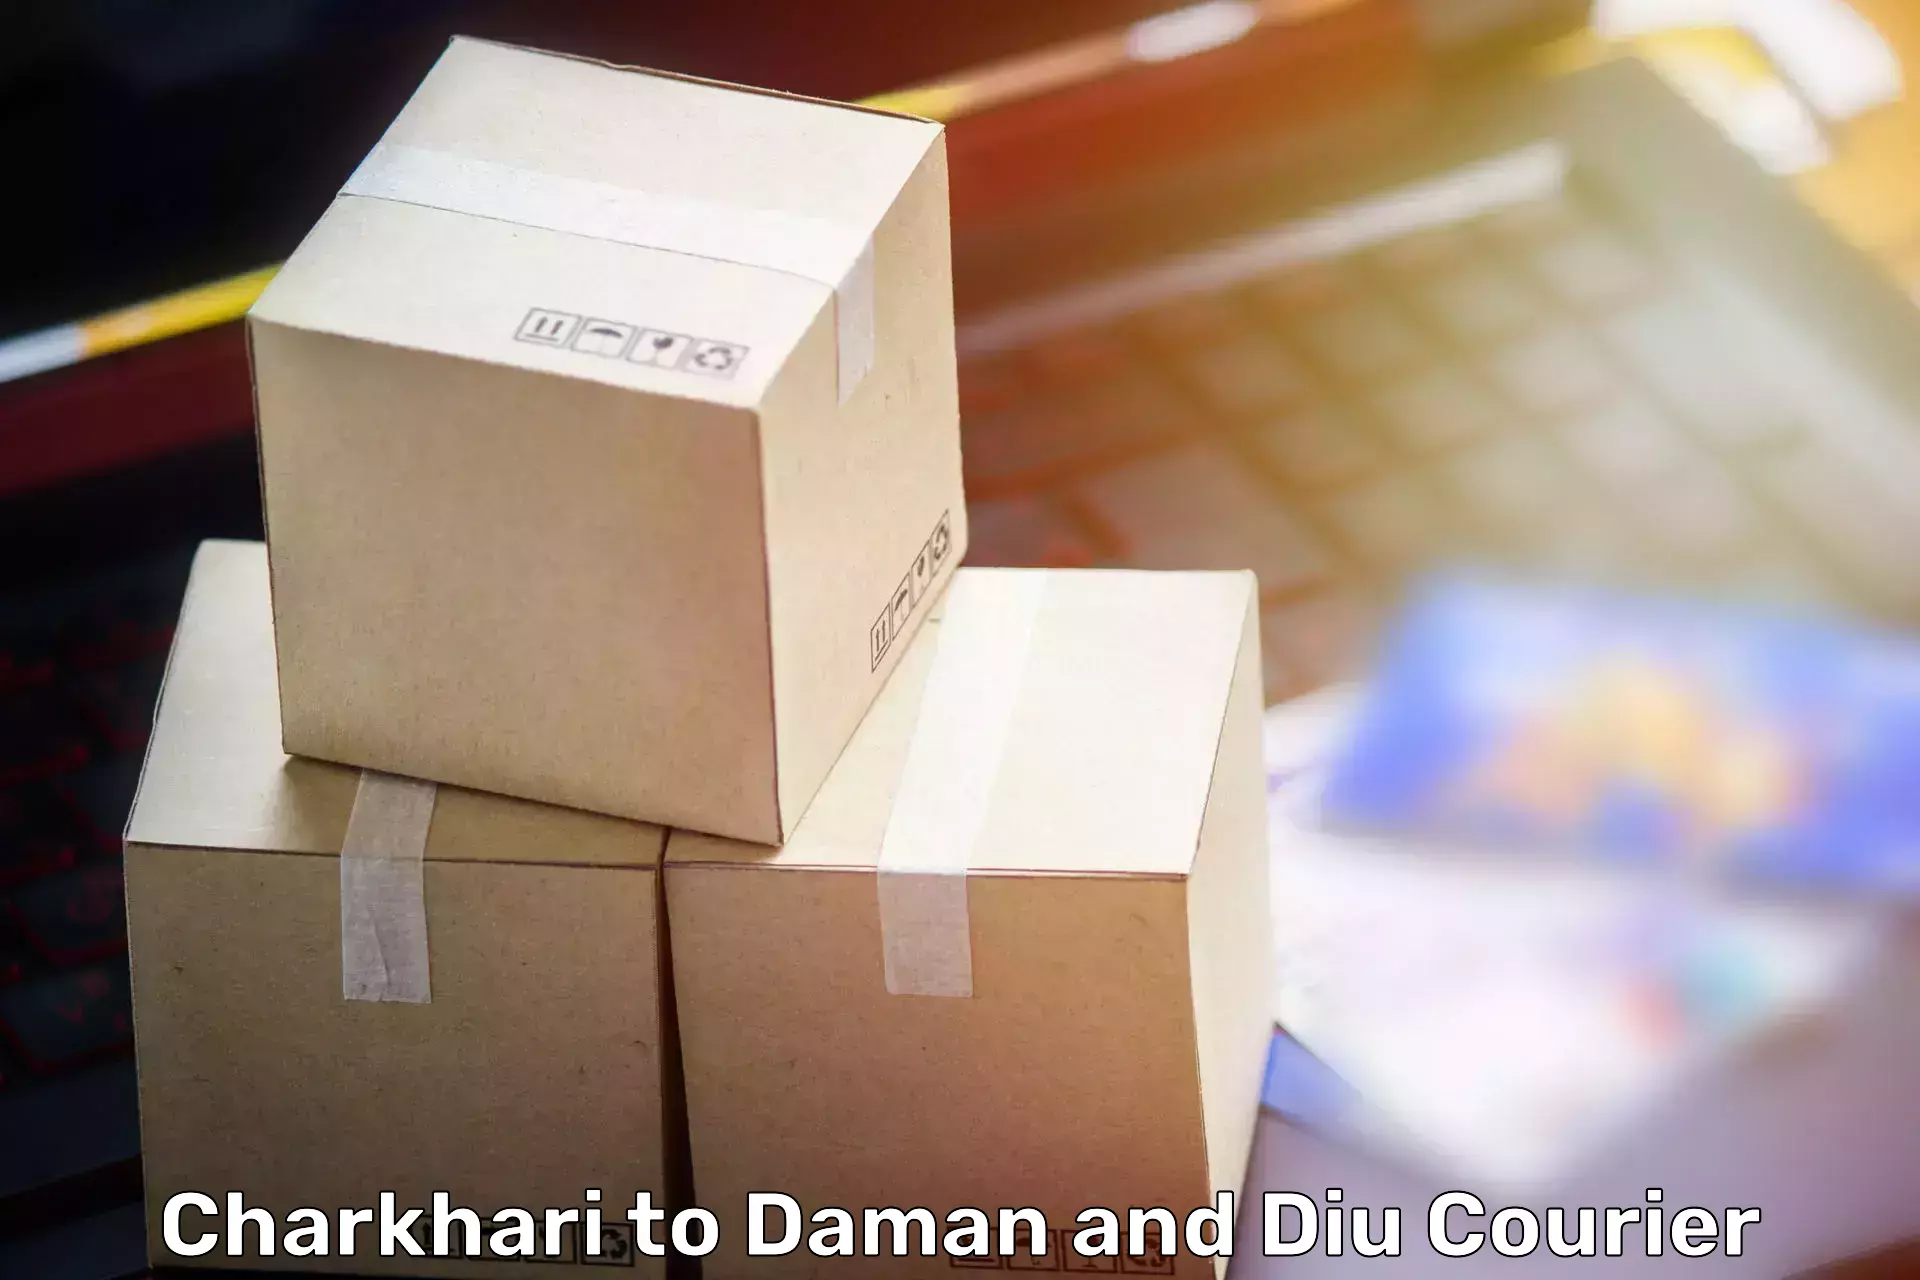 Comprehensive relocation services in Charkhari to Diu